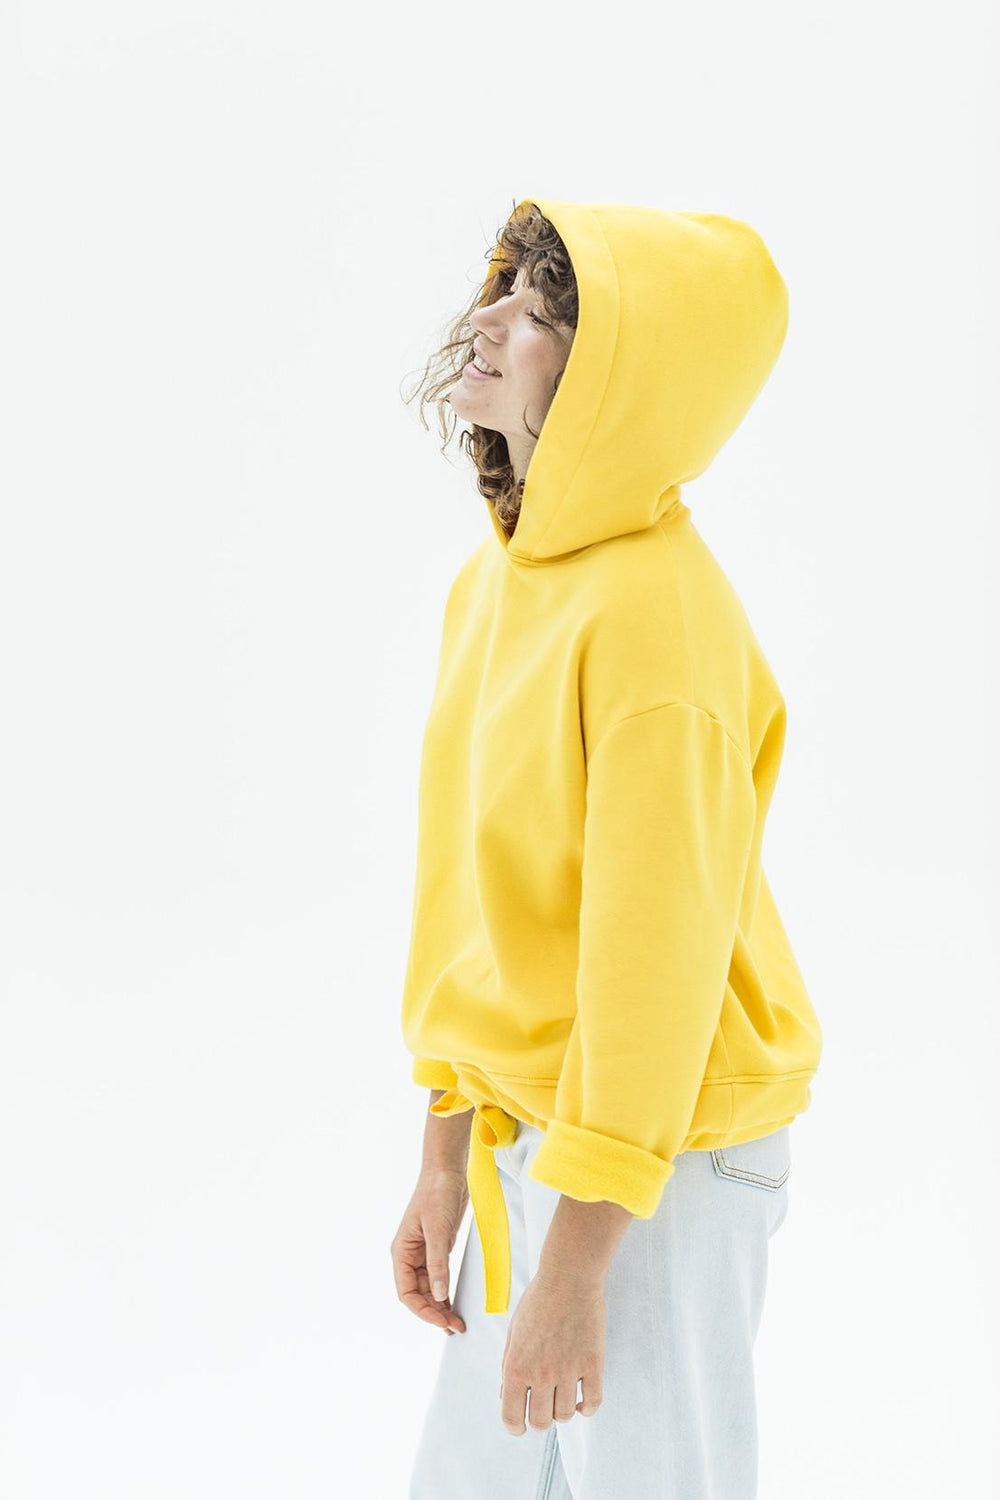 Women wearing the Frikka Hoodie sewing pattern from Fibre Mood on The Fold Line. A hoodie pattern made in sweatshirting fabrics like interlock jersey, neoprene and stretch with “weight”, featuring a roomy hood, oversized silhouette, long sleeves and waist